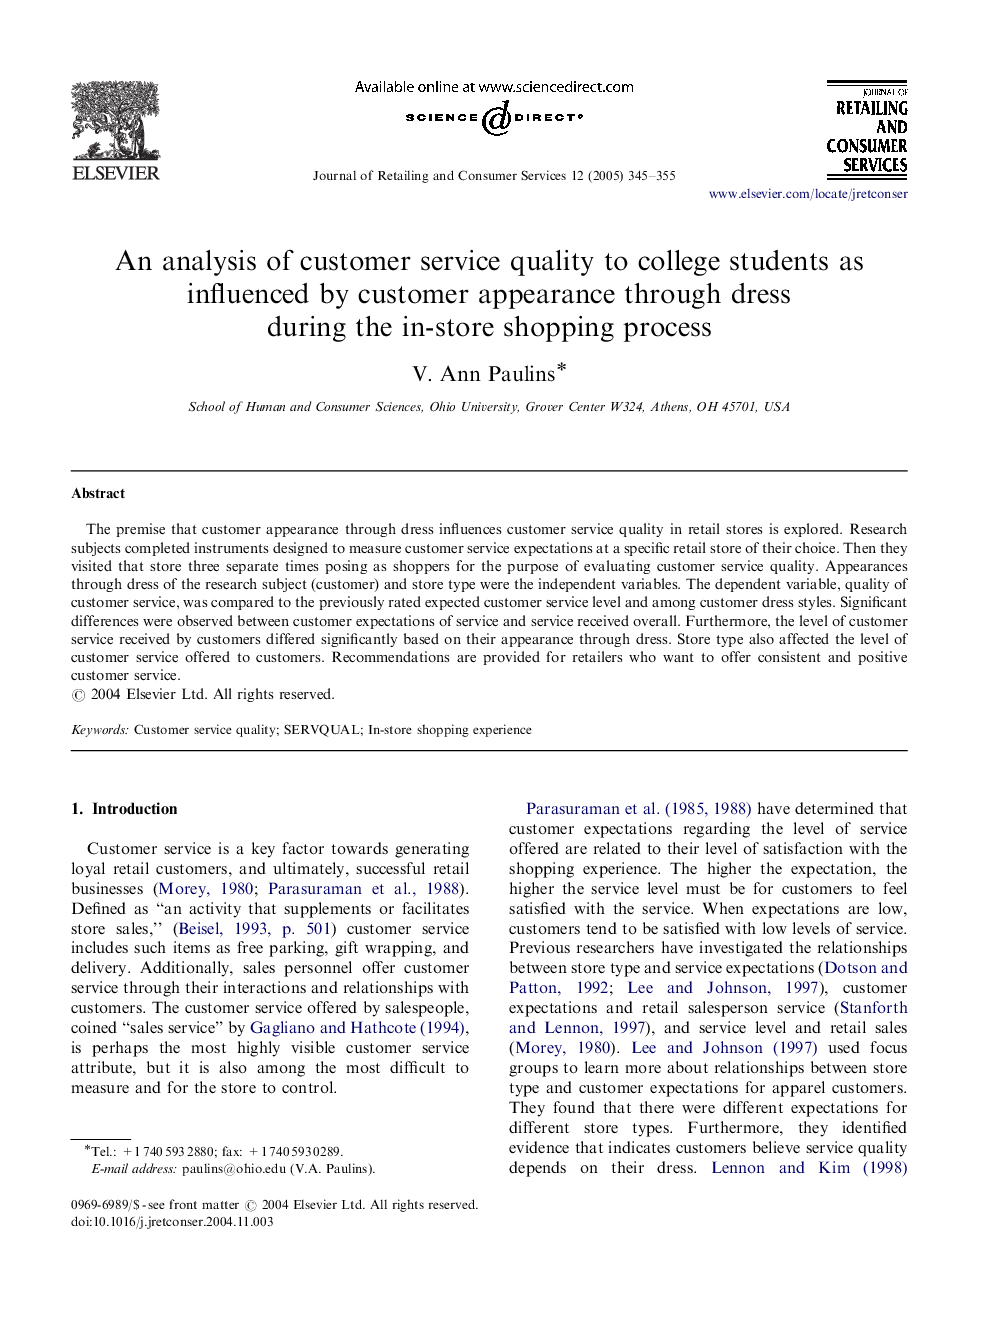 An analysis of customer service quality to college students as influenced by customer appearance through dress during the in-store shopping process